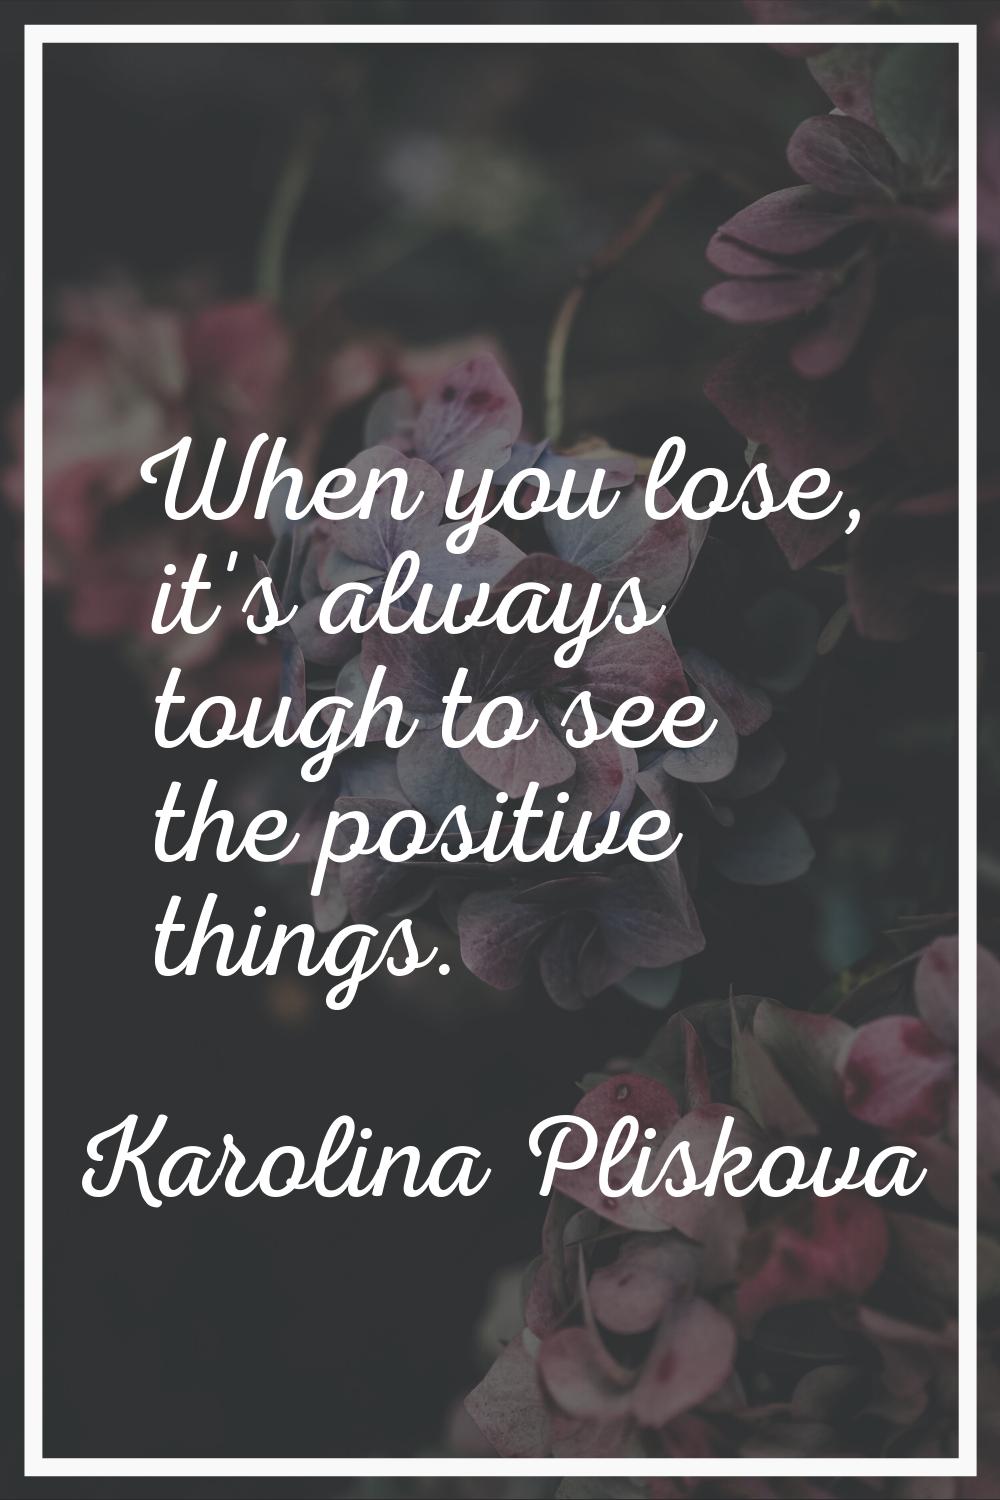 When you lose, it's always tough to see the positive things.